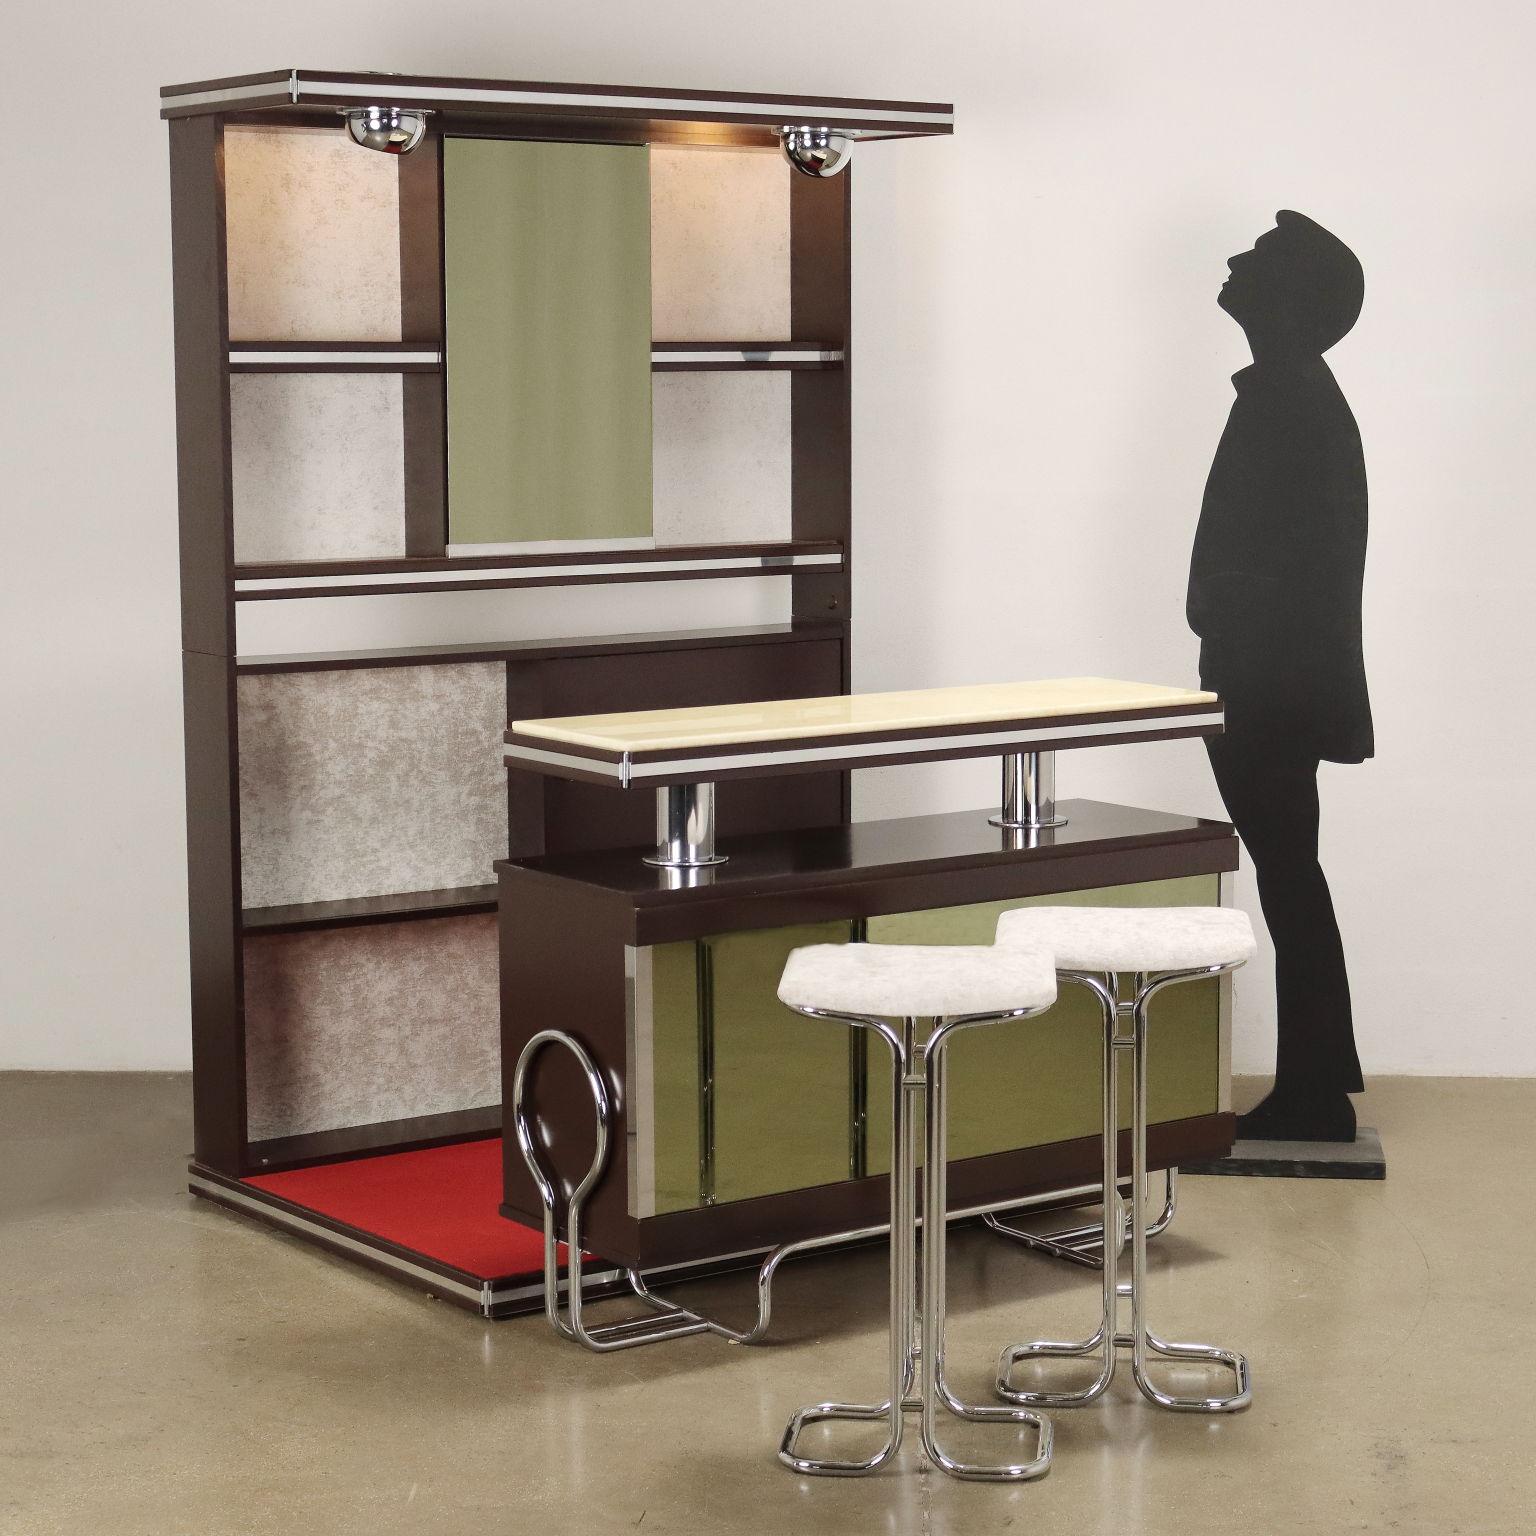 Bar cabinet with wall element with bottle holder compartments with sliding door and adjustable spotlights, platform, counter element, with storage compartment and functioning refrigerator, pair of stools. Lacquered wood, velvet upholstery, chromed